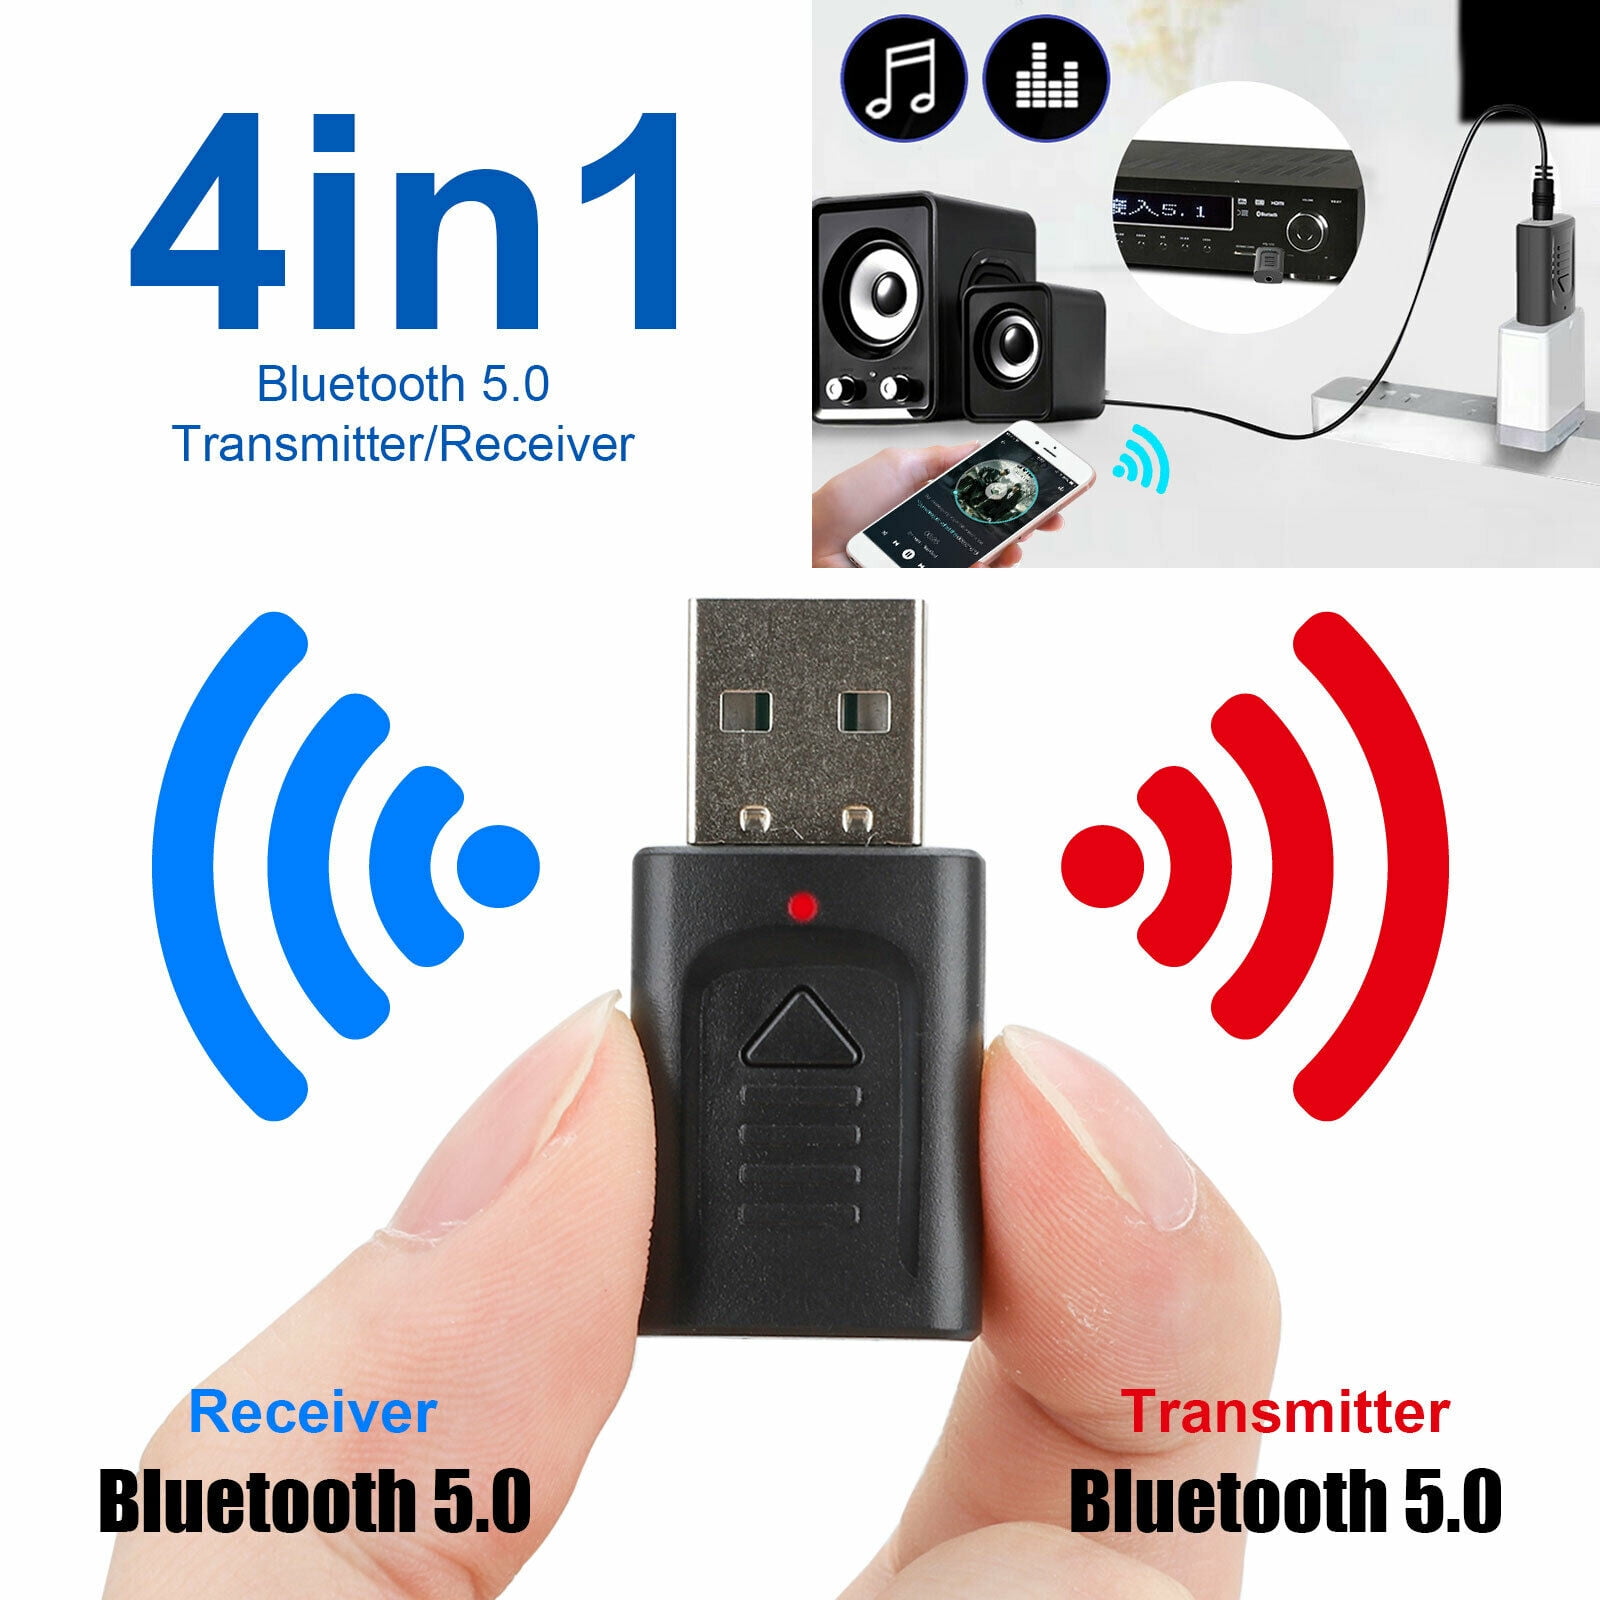 Wireless Bluetooth 4.0 Transmitter Stereo Music Audio Adapter 3.5mm For TV PC CH